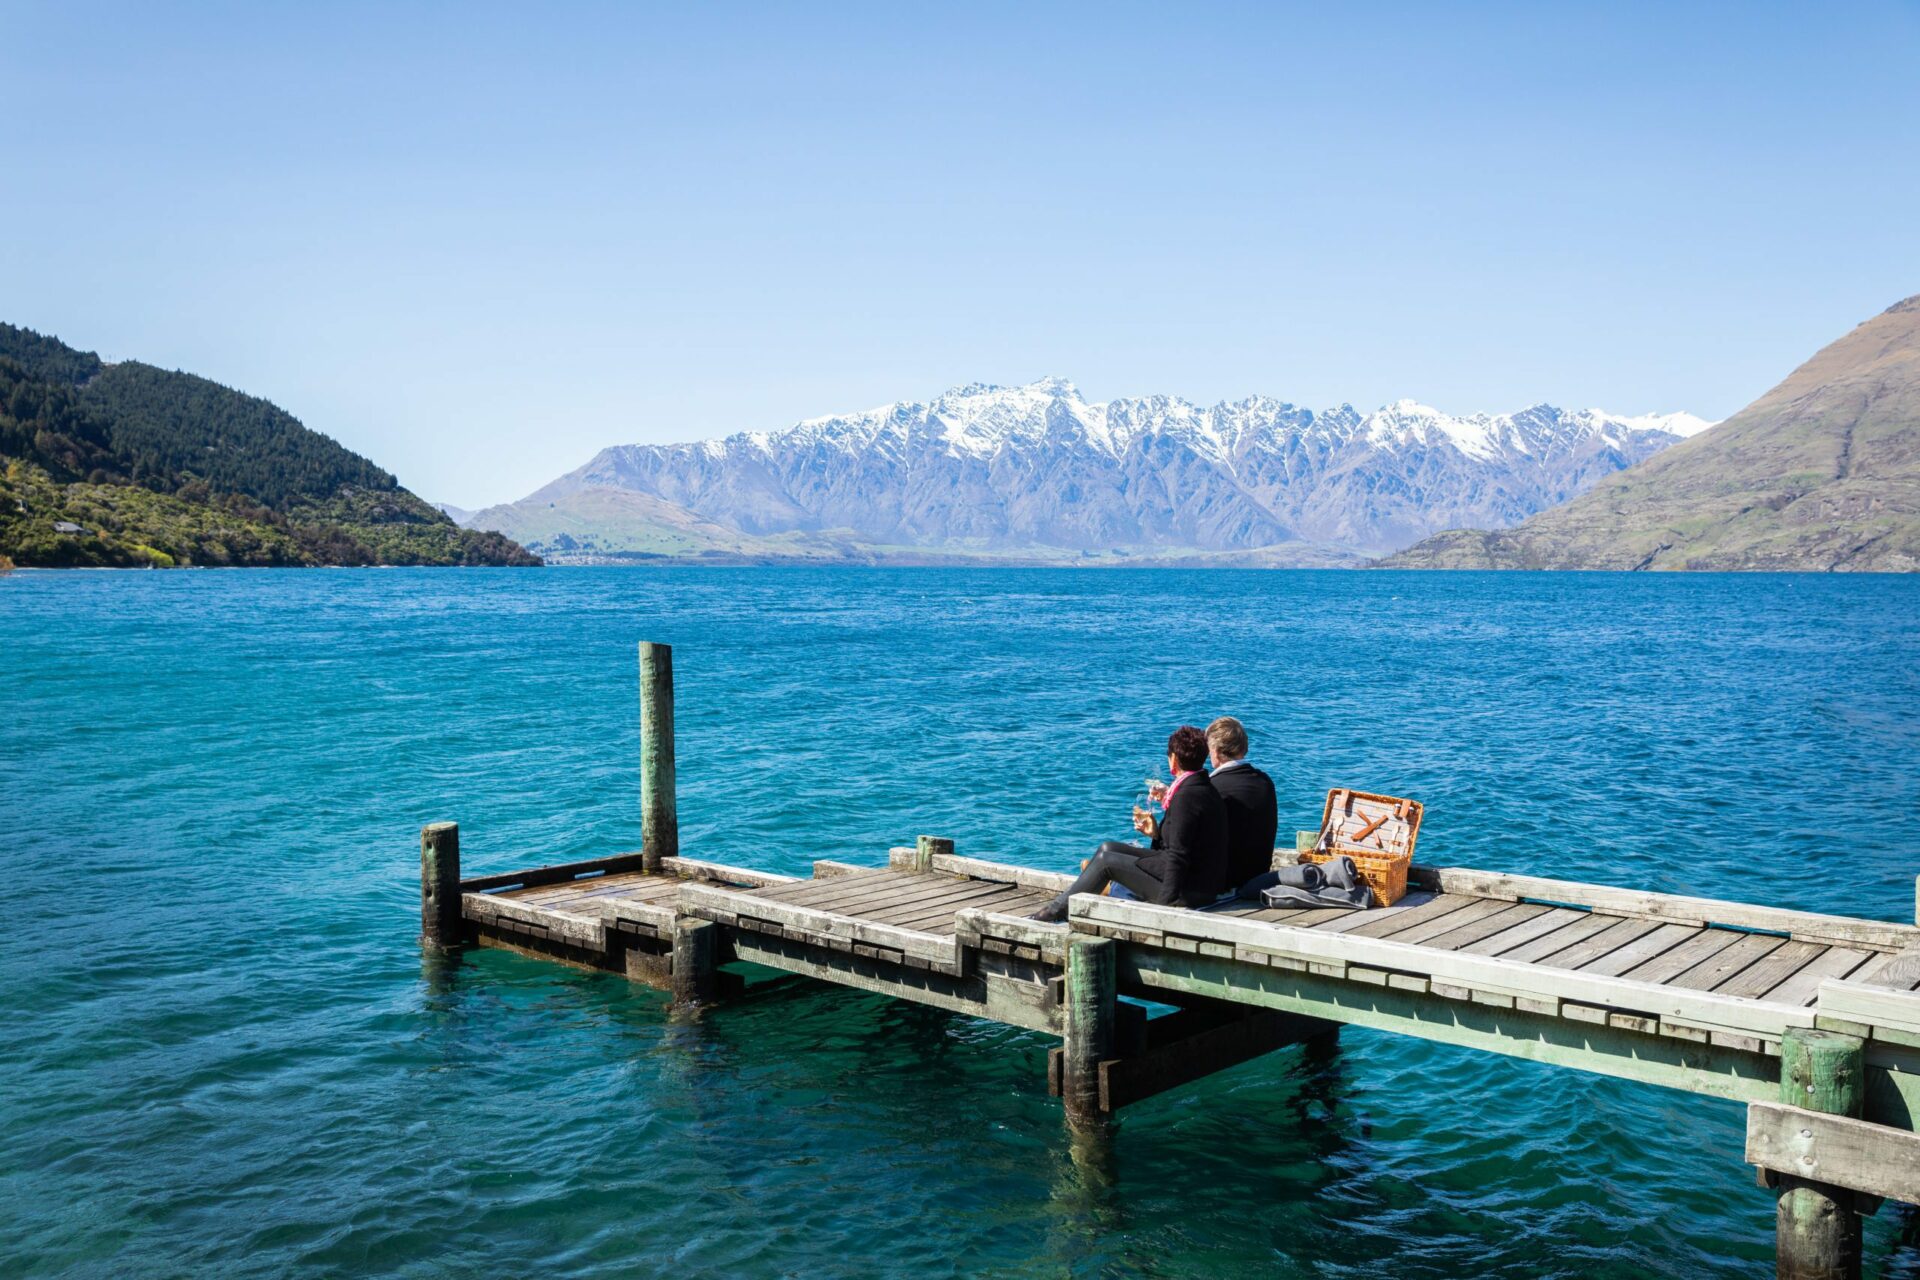 A couple enjoys a private picnic on the jetty at Matakauri Lodge, overlooking Lake Wakatipu and the Remarkables on safari in New Zealand